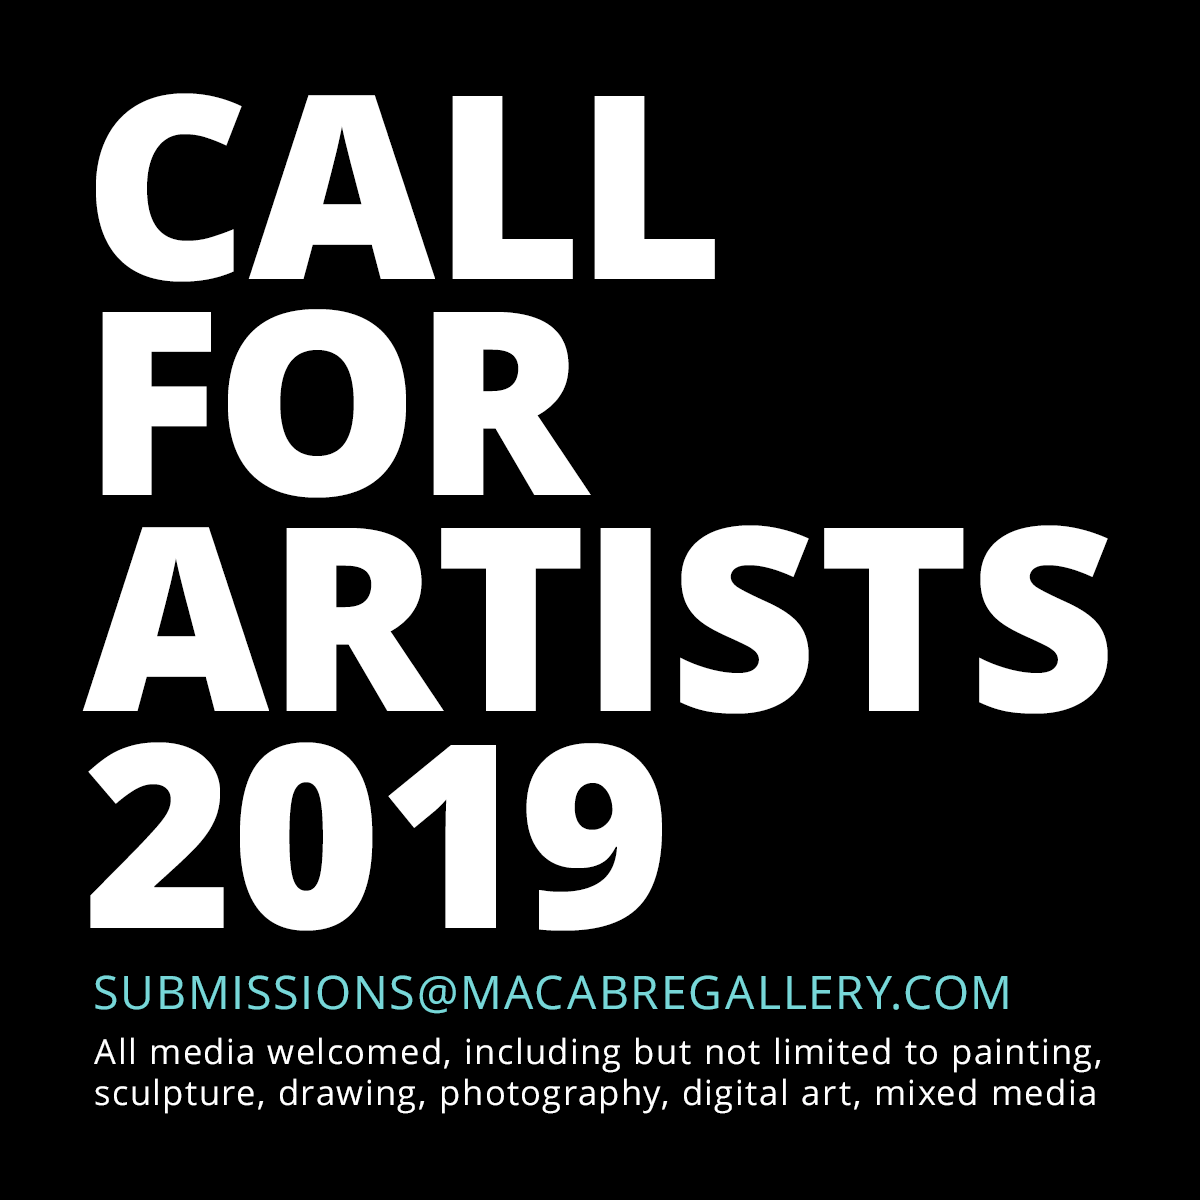 Call for artists 2019